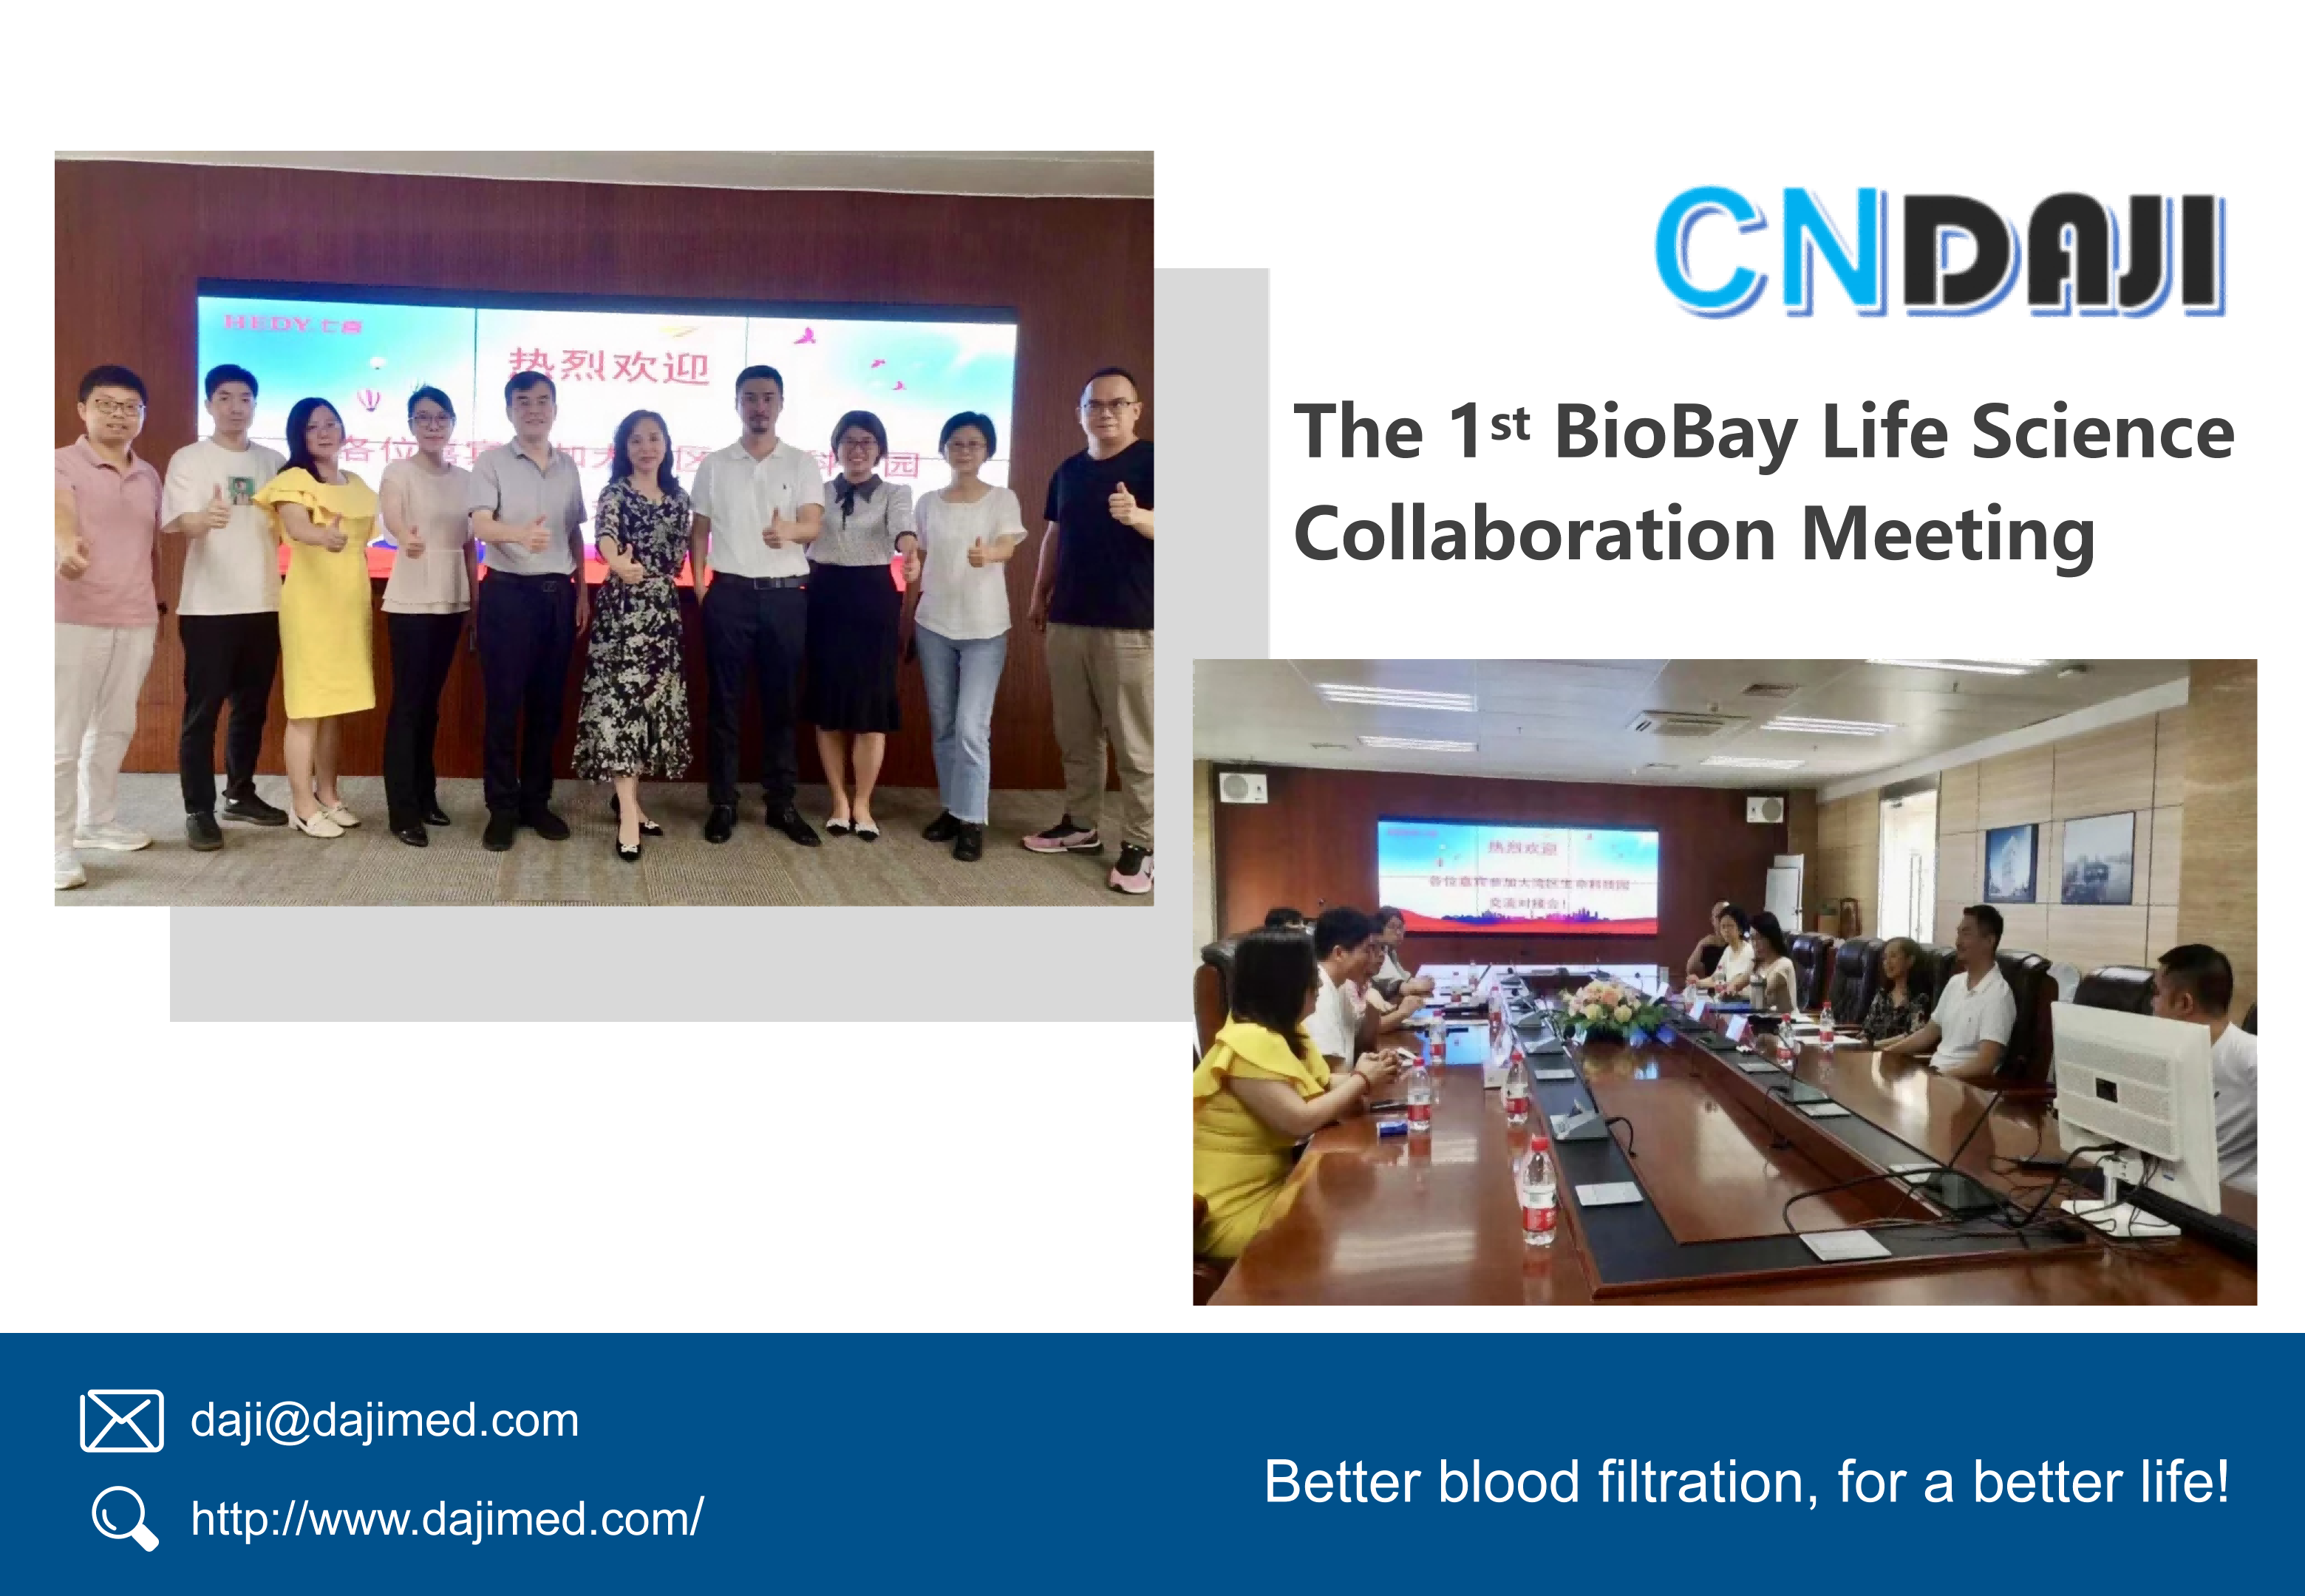 The 1st BioBay Life Science Collaboration Meeting